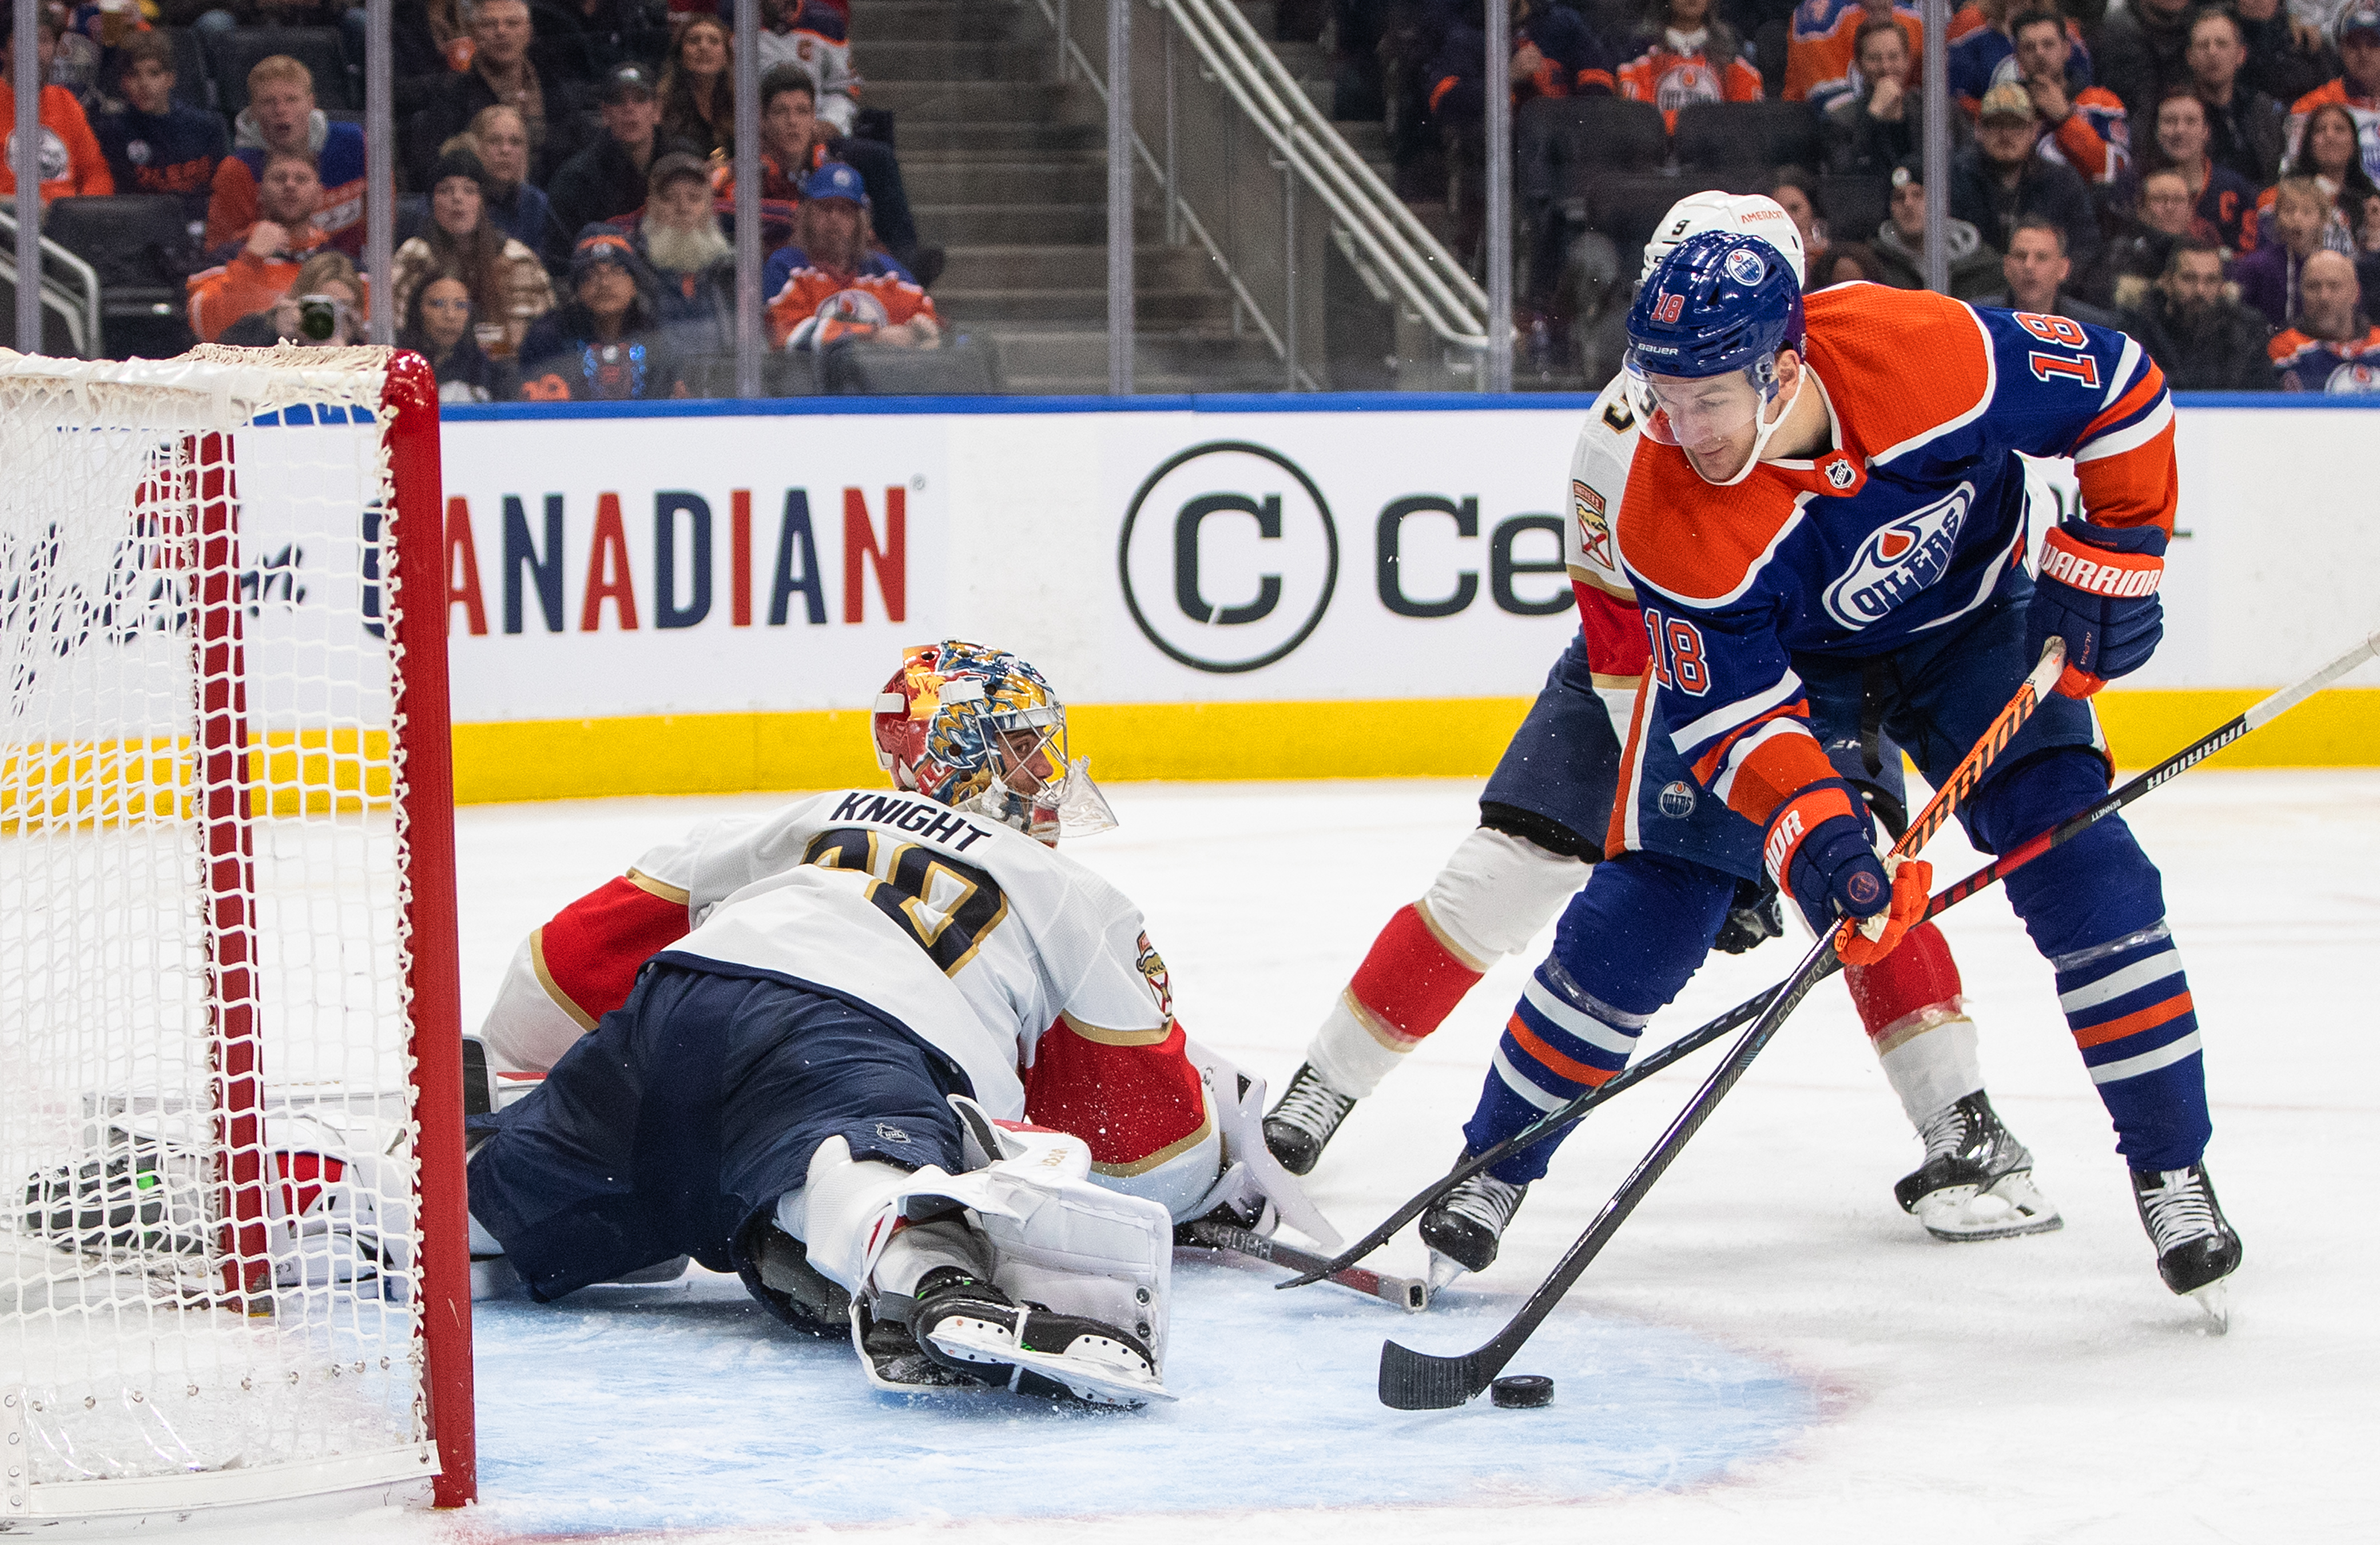 Draisaitl caps Oilers comeback against Panthers after Bouchard forces OT